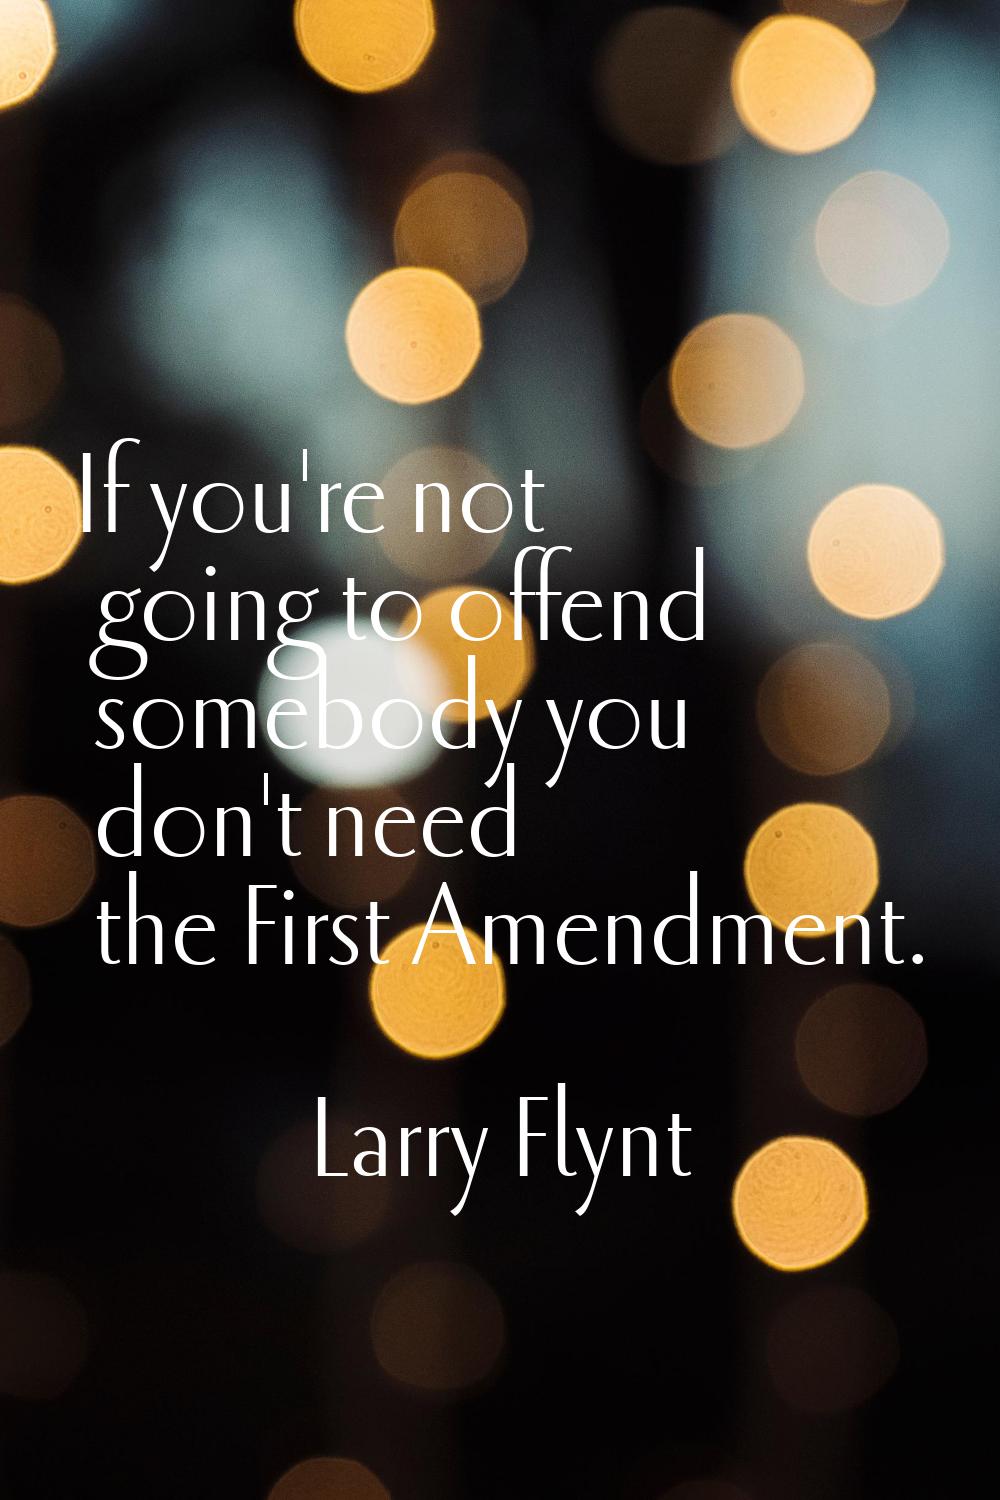 If you're not going to offend somebody you don't need the First Amendment.